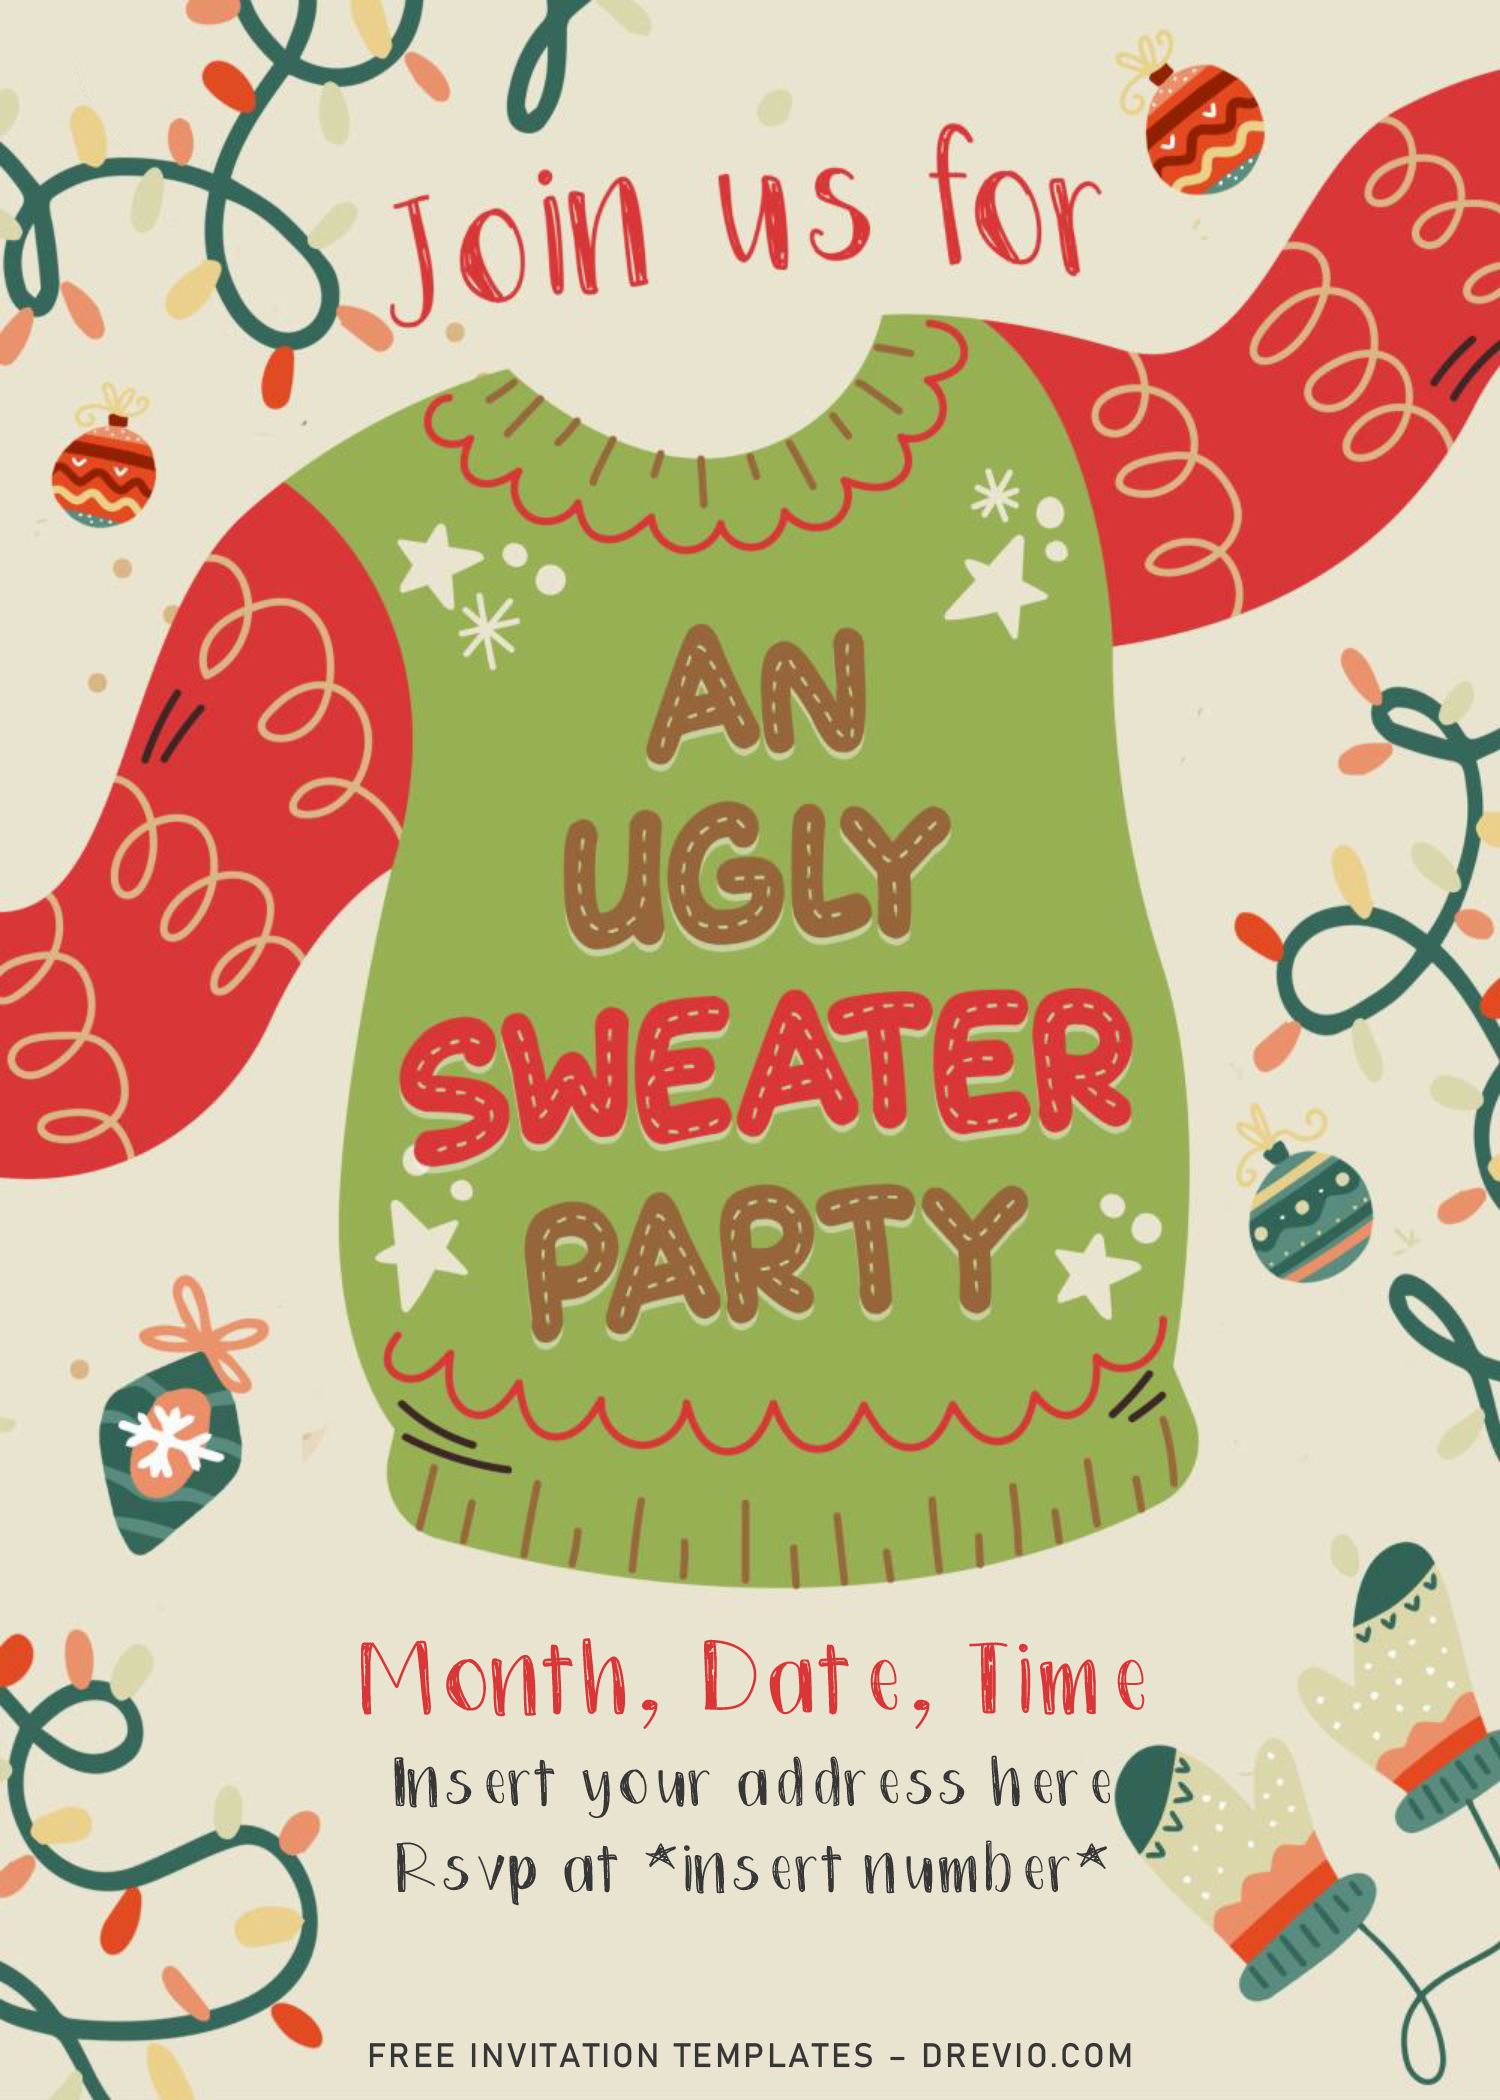 Free Ugly Sweater Party Invitation Templates For Word Download